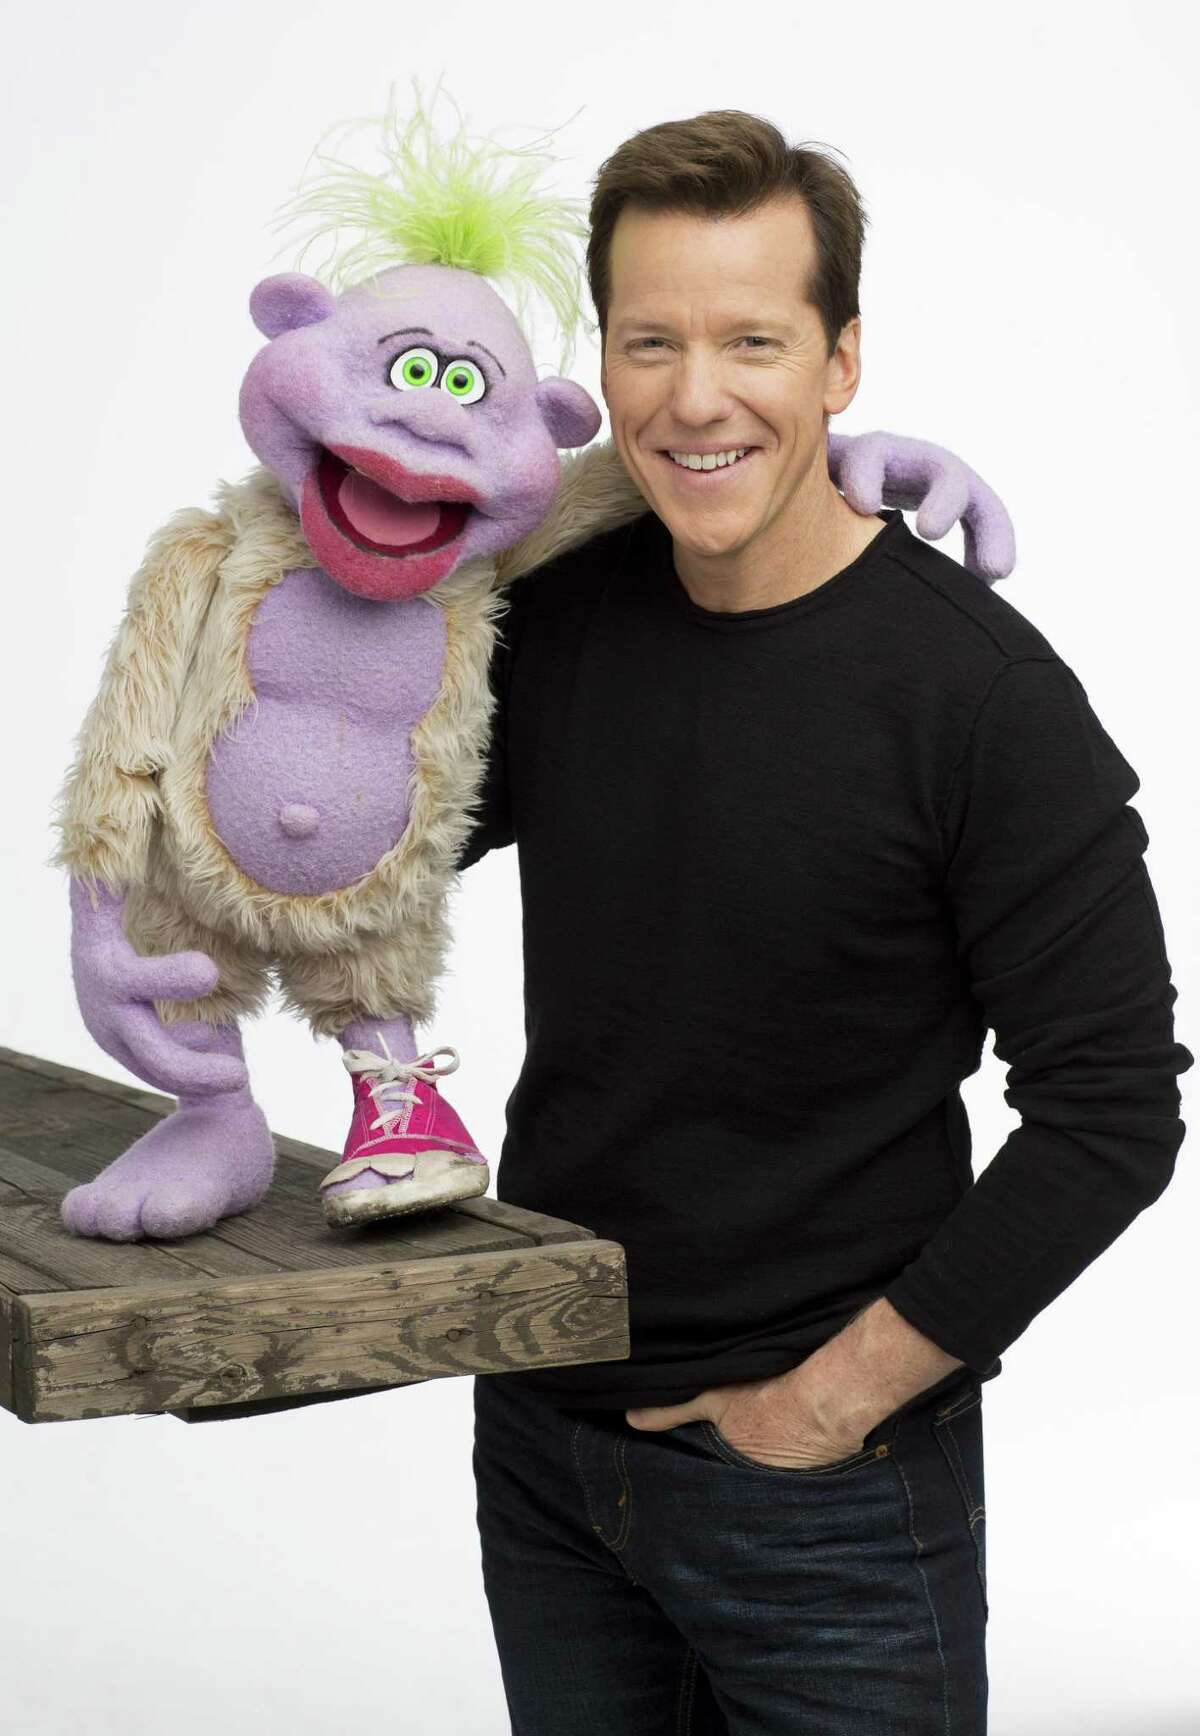 Ventriloquist/comedian Jeff Dunham will perform at Webster Bank Arena in Bridgeport on March 16.